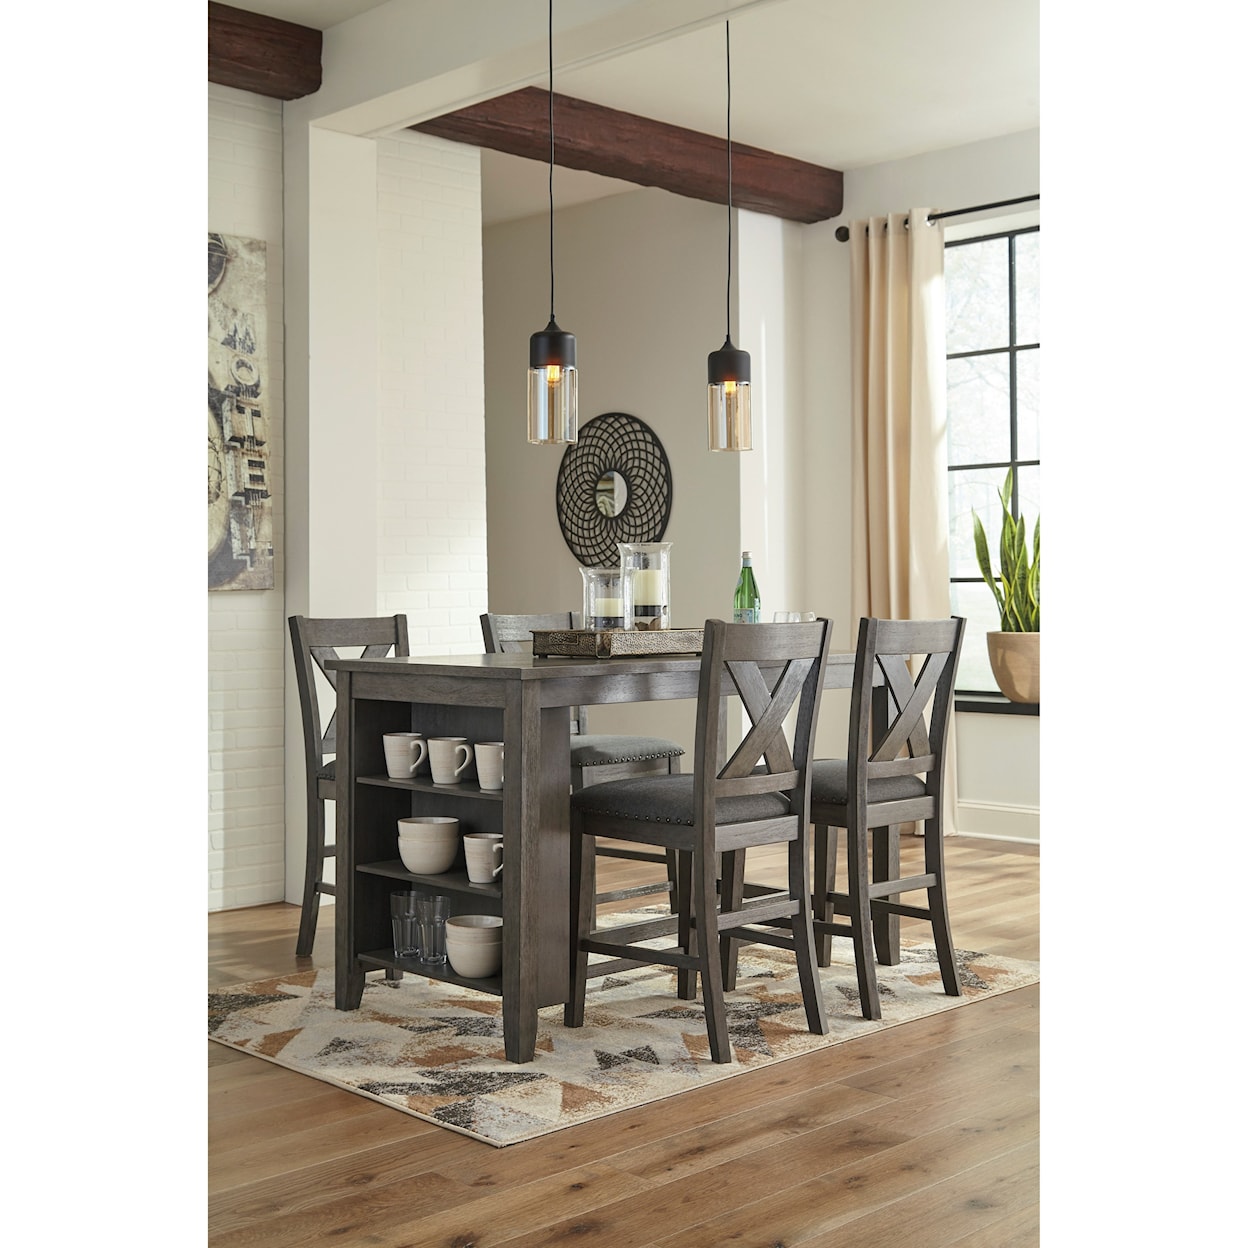 Signature Design by Ashley Caitbrook 5pc Dining Room Group